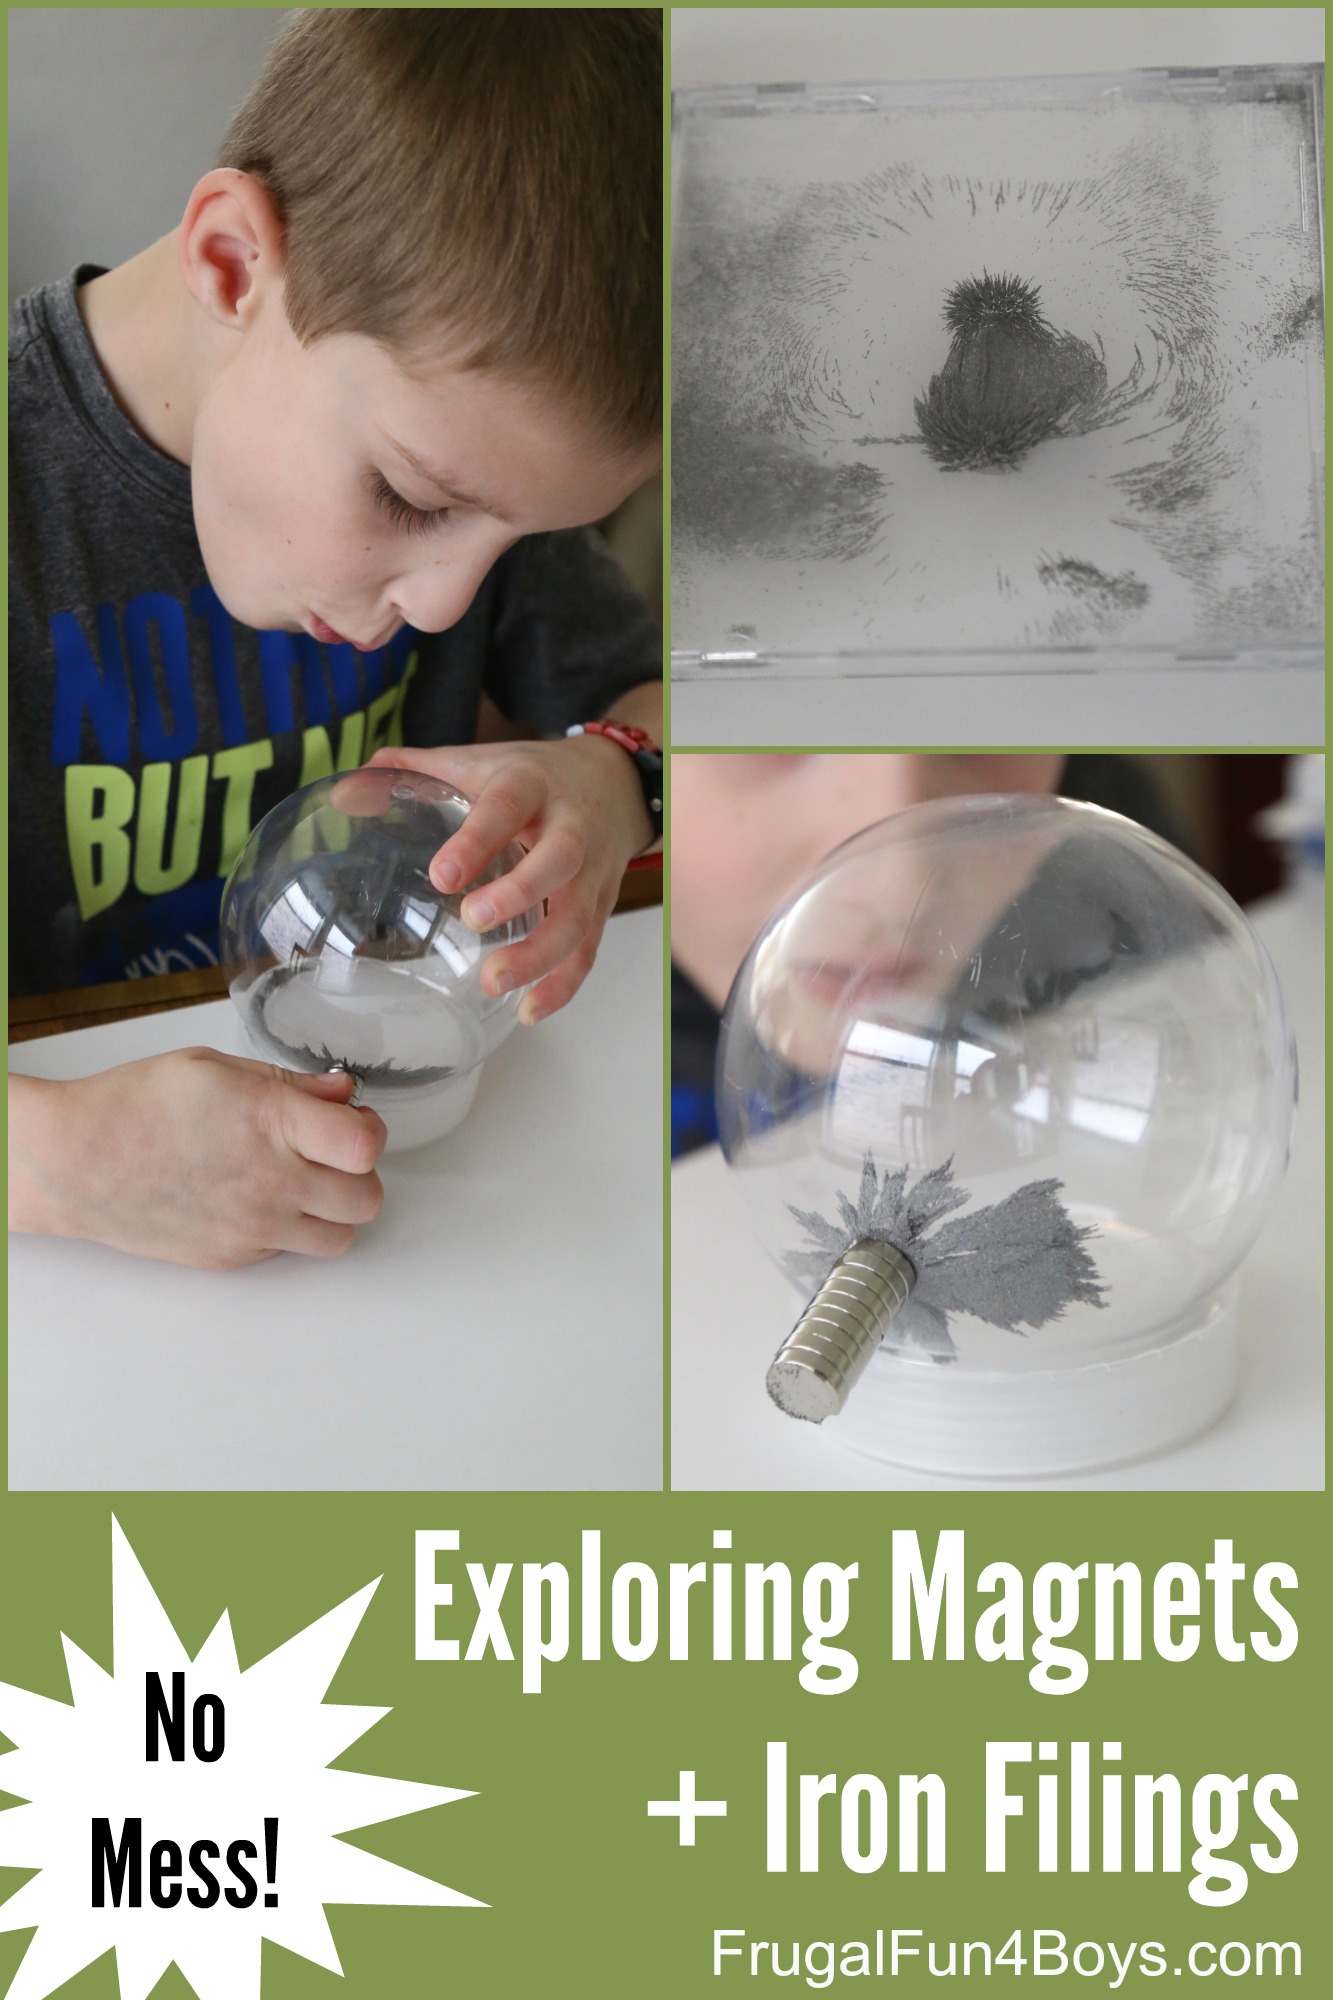 No Mess Science Explorations with Magnets and Iron Filings